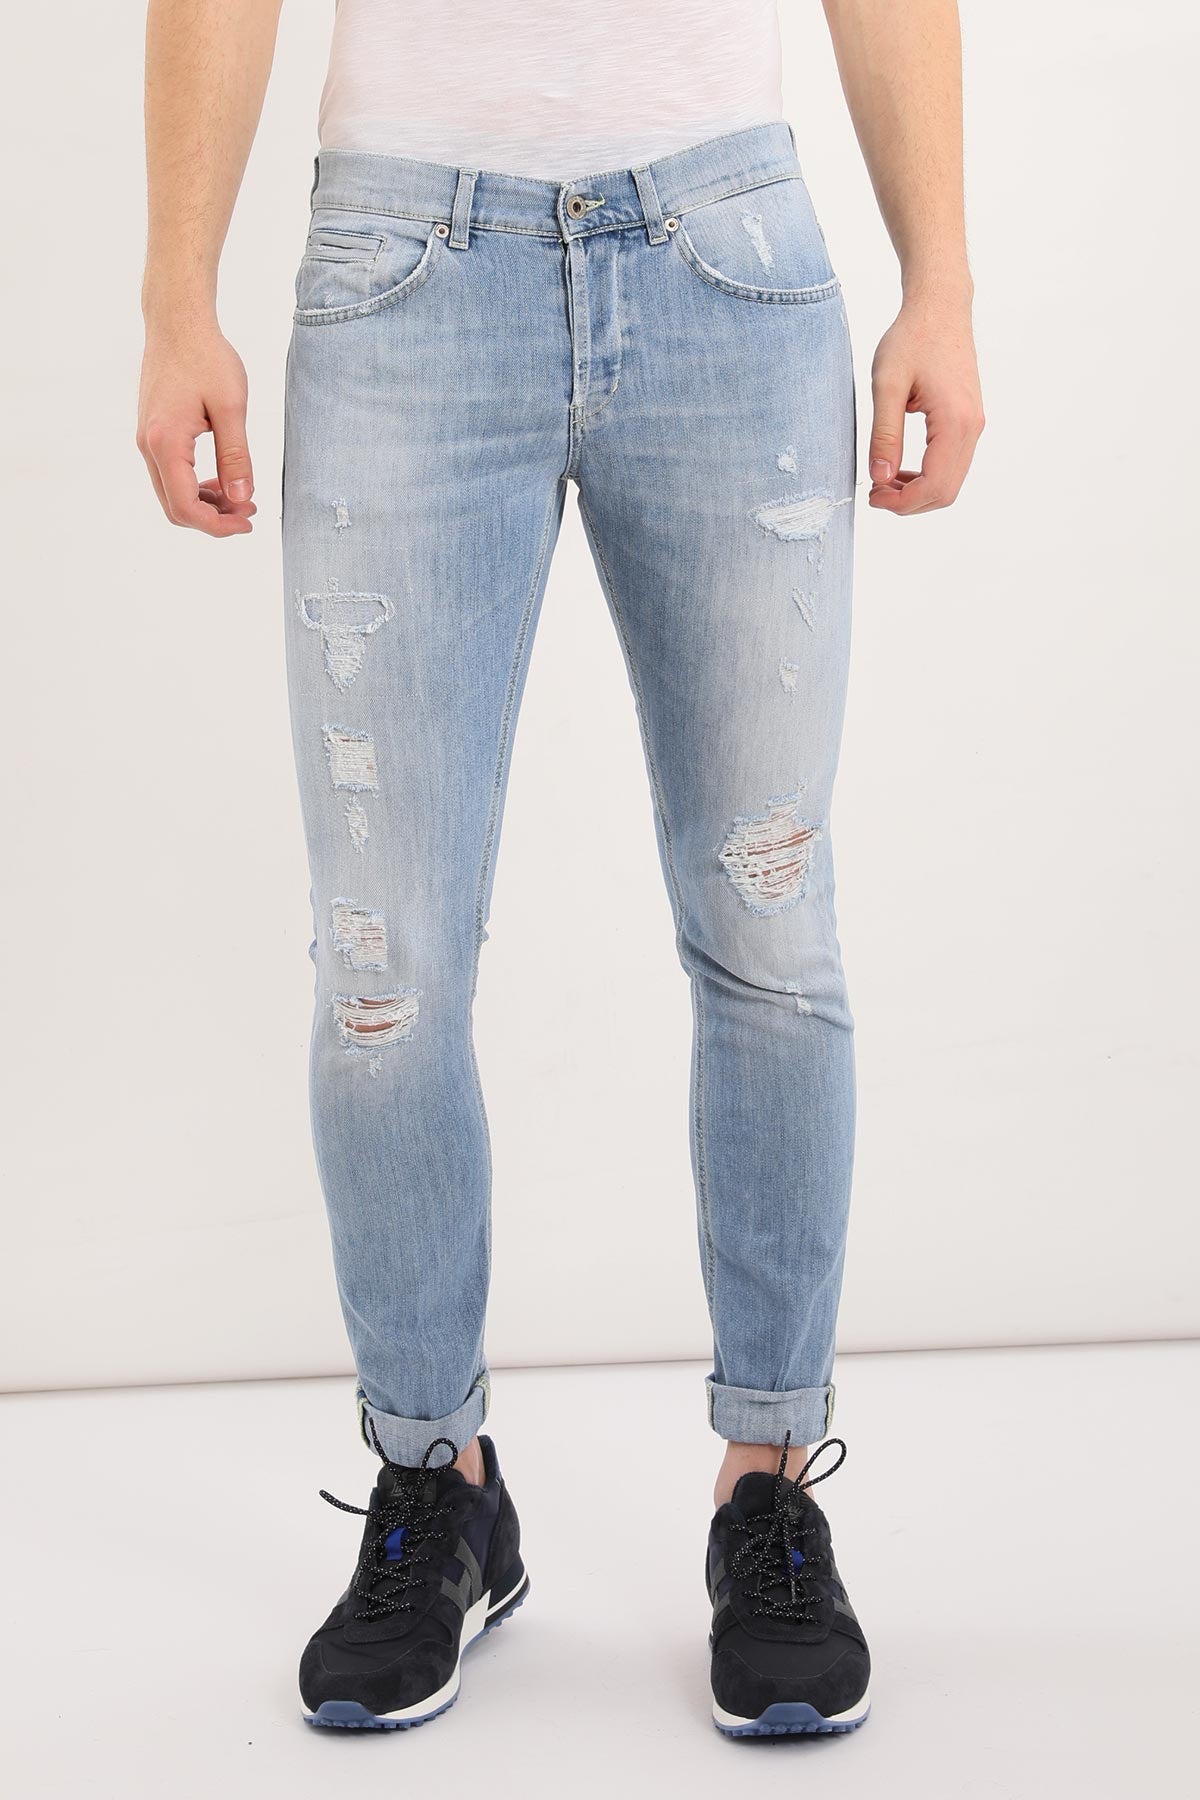 Dondup Skinny Fit Jeans-Libas Trendy Fashion Store